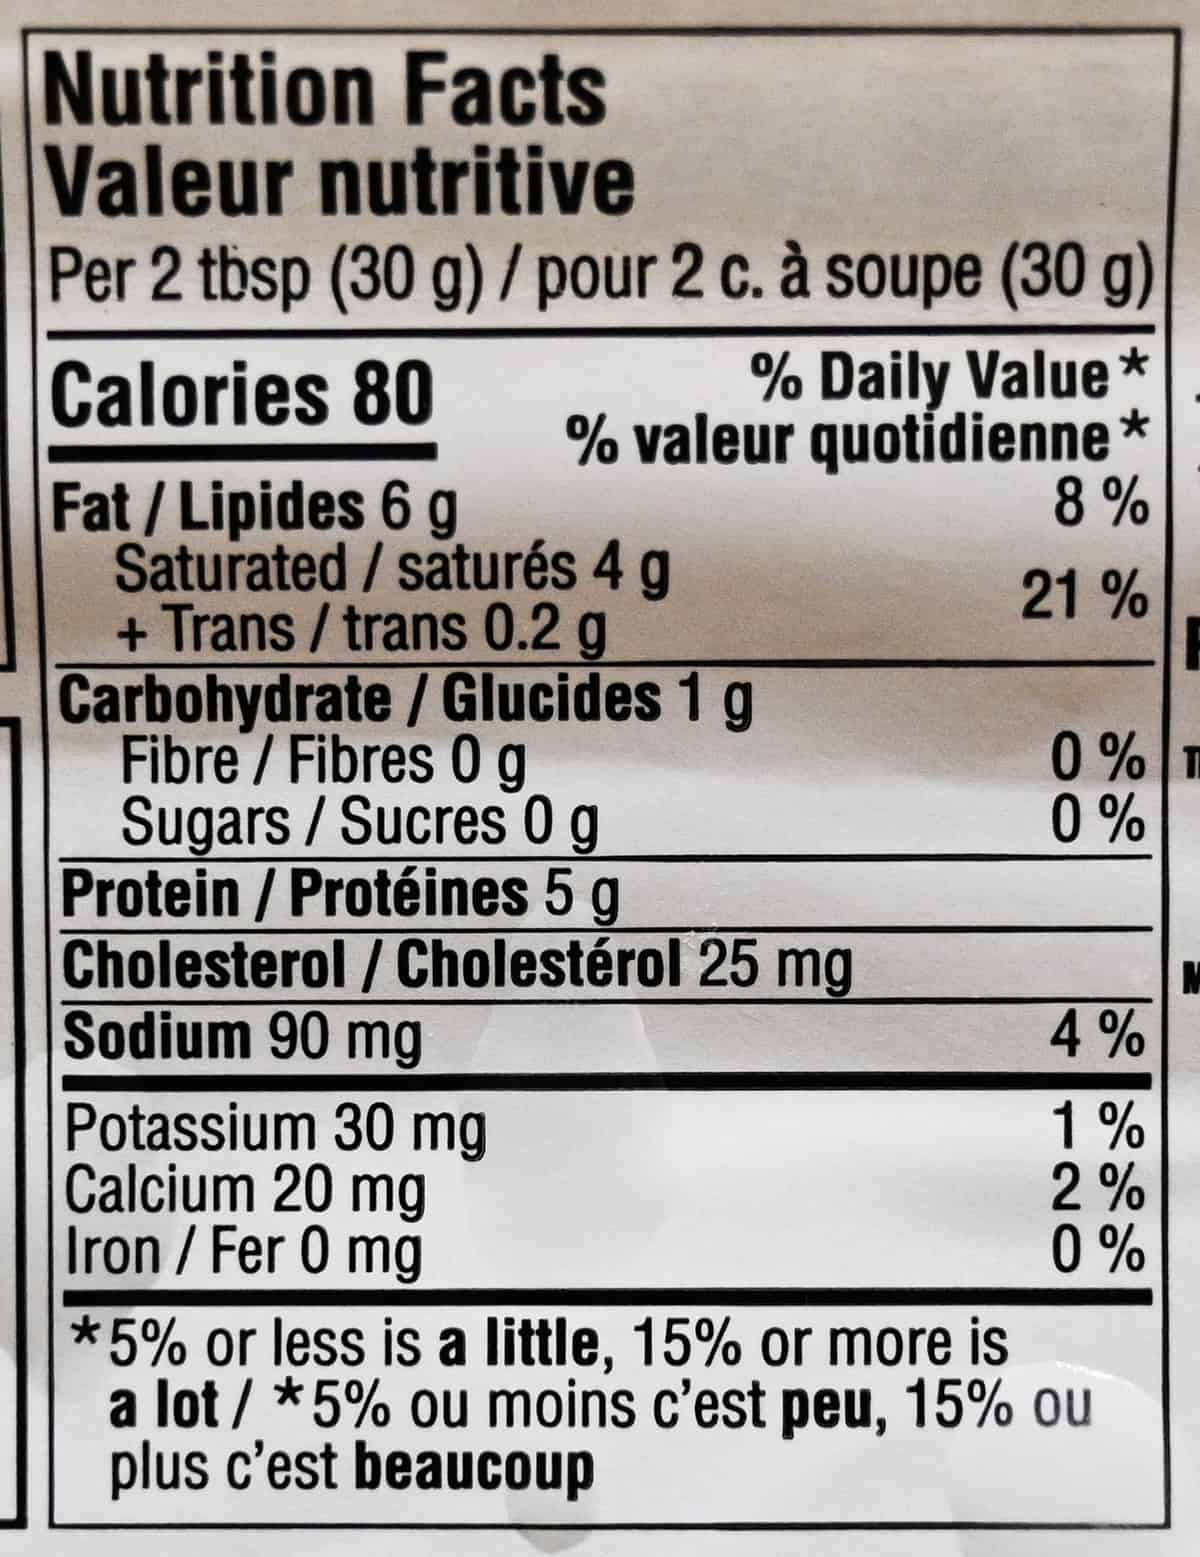 Image of the nutrition facts from the package.